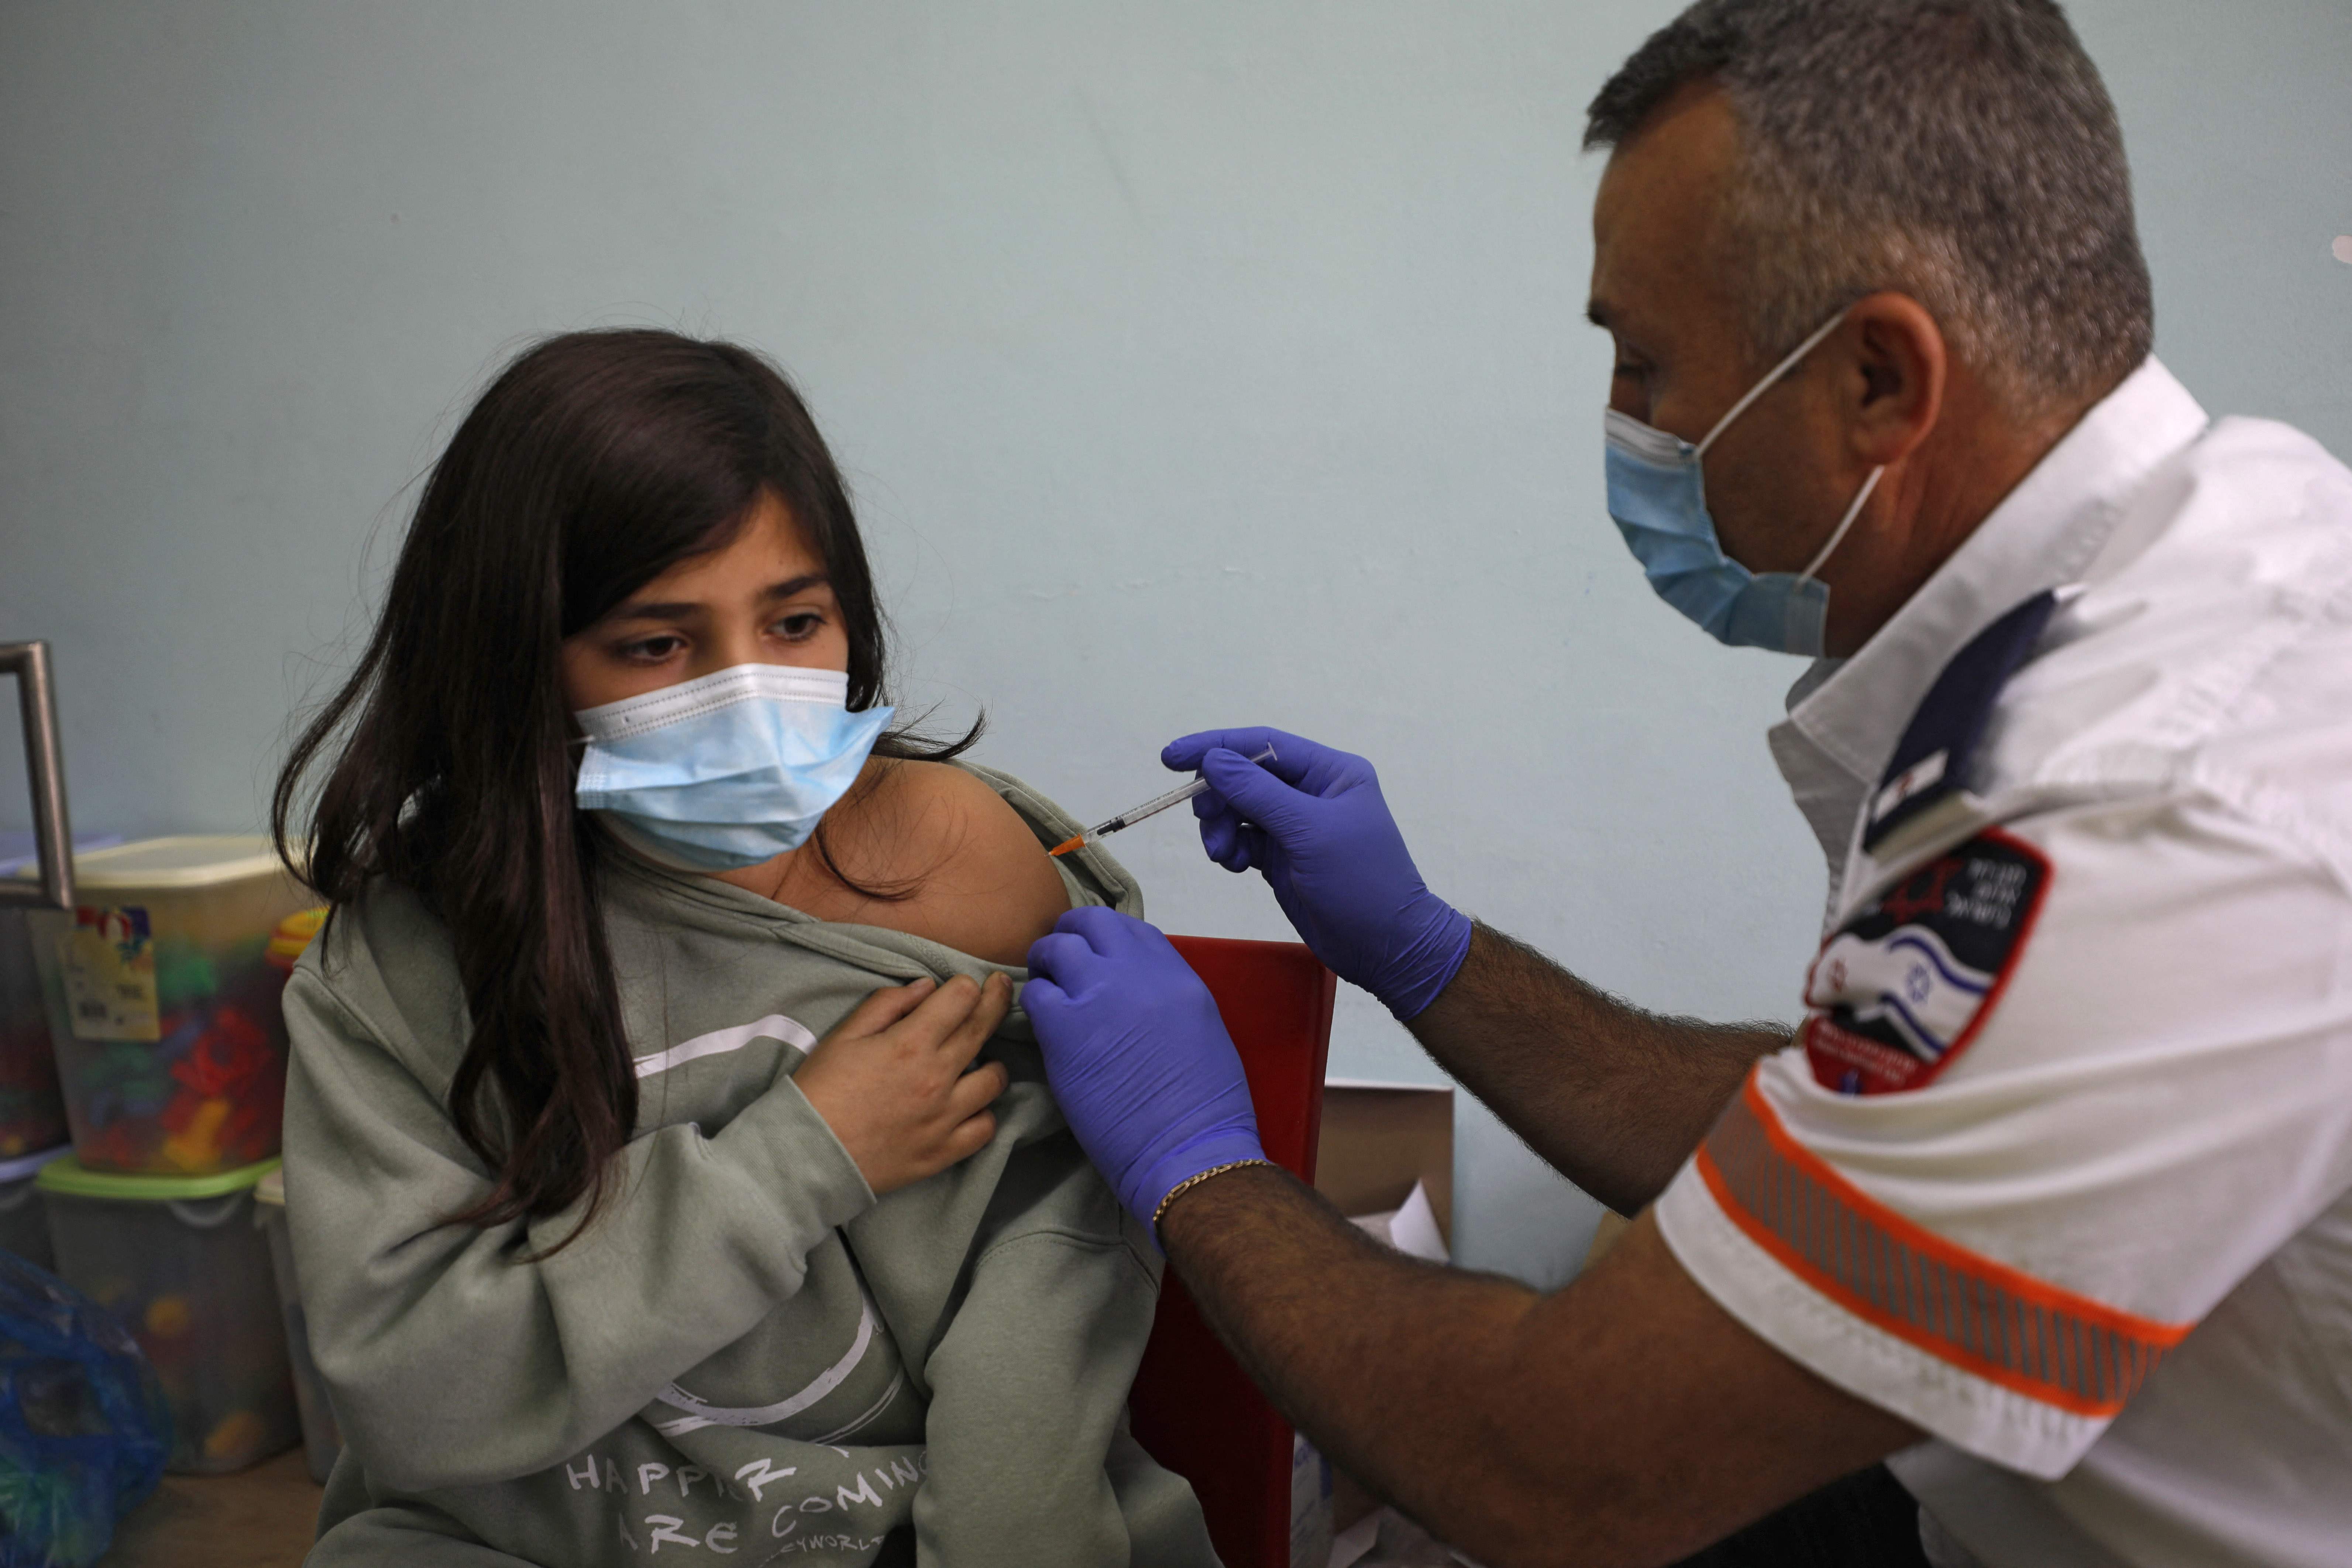 An Israeli health worker administers a dose of the Pfizer/BioNTech Covid-19 vaccine to a student